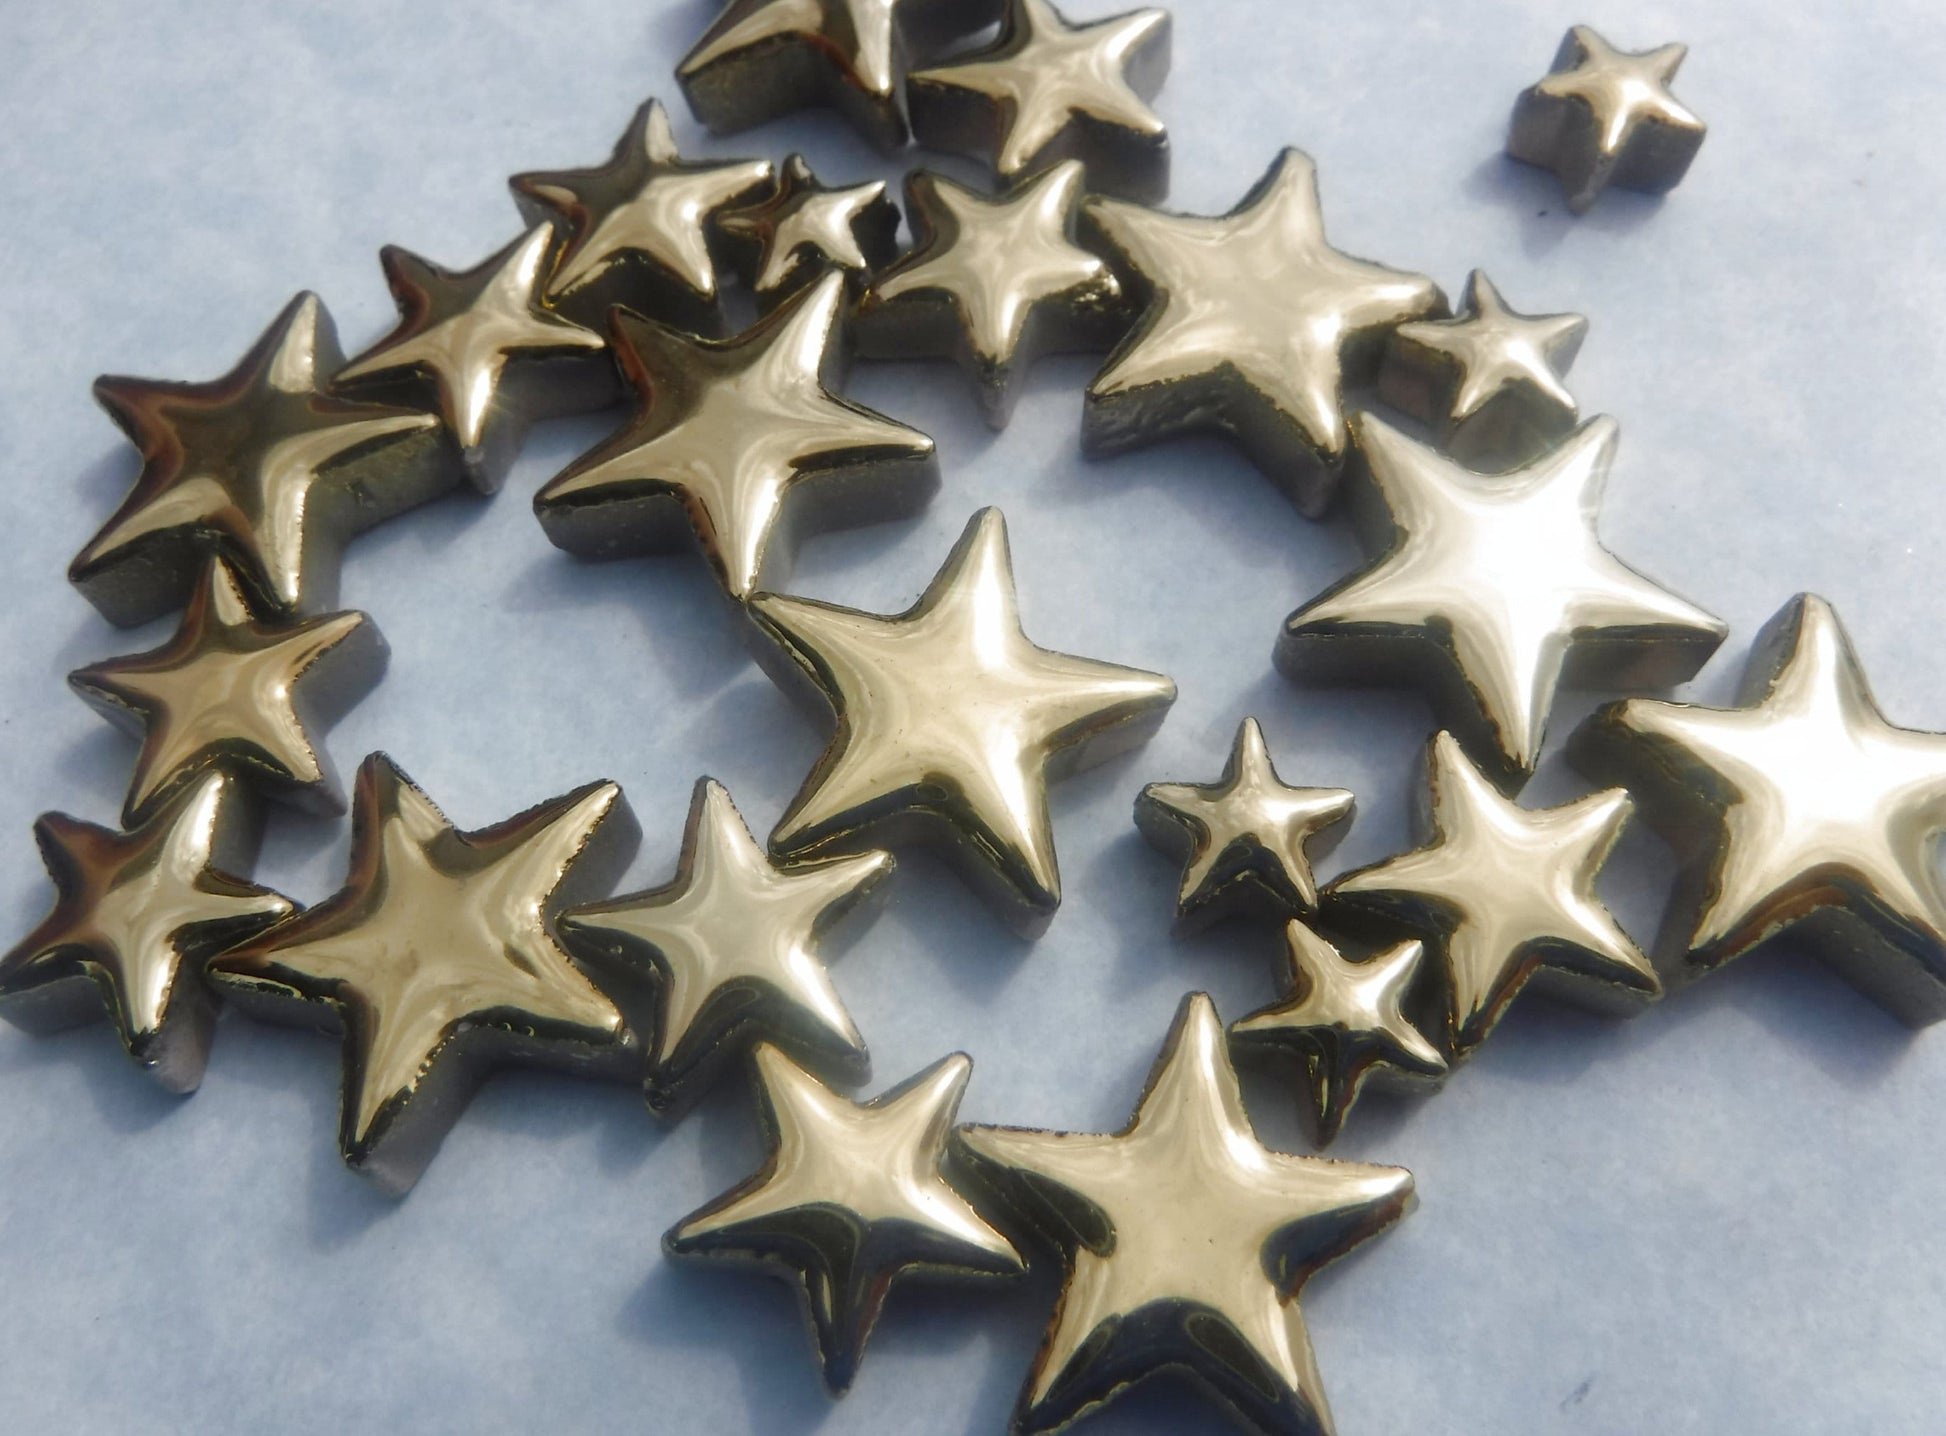 Gold Stars Mosaic Tiles - 50g Ceramic in Mix of 3 Sizes - 20mm, 15mm, 10mm